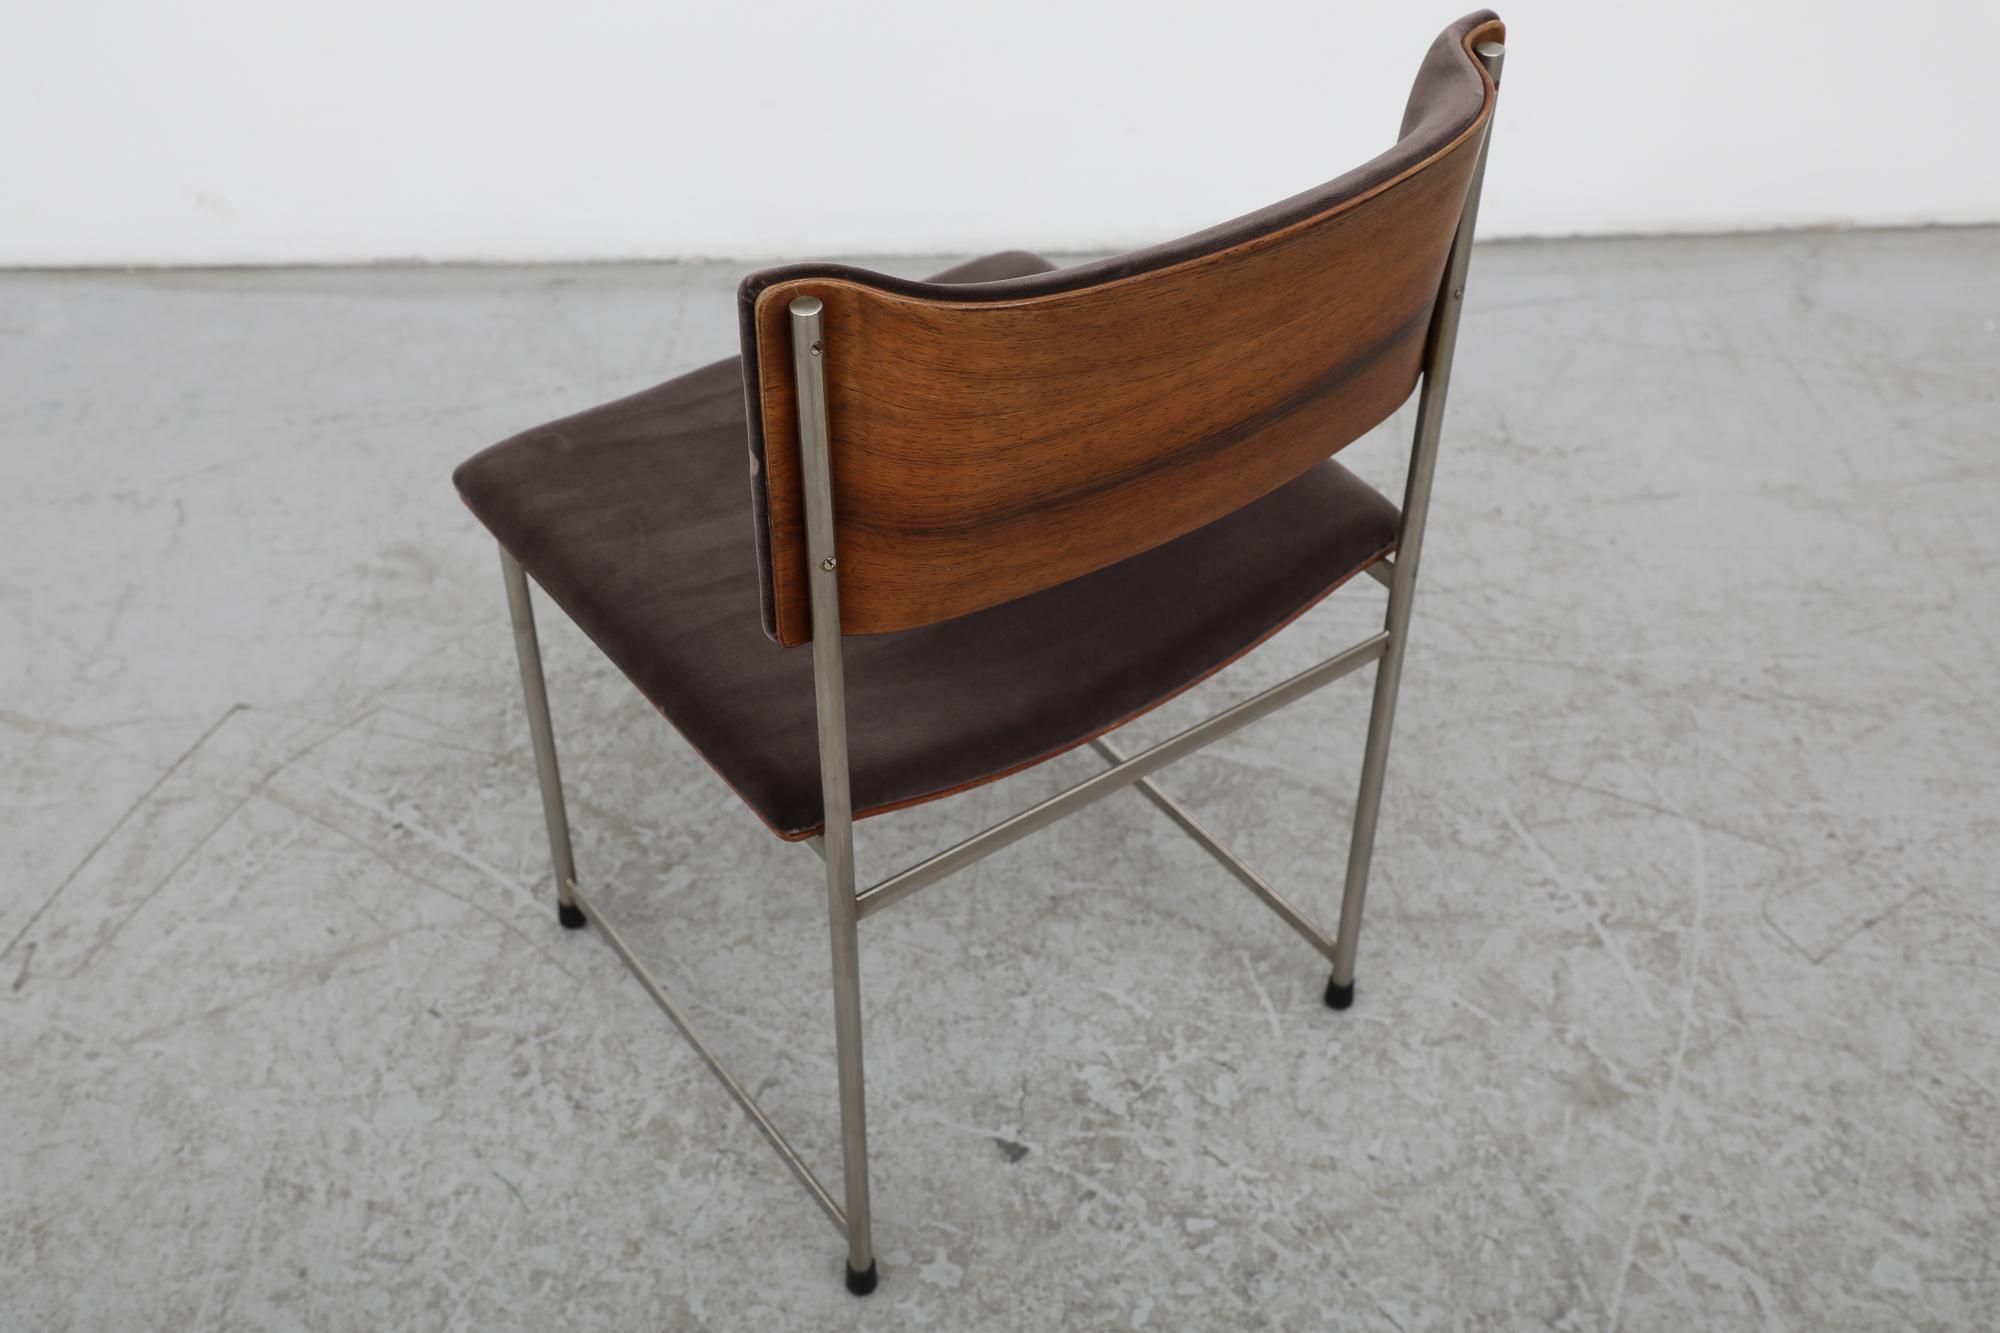 Single Cees Braakman Rosewood and Chrome ‘SM08’ Dining Chair for Pastoe, 1960s For Sale 1